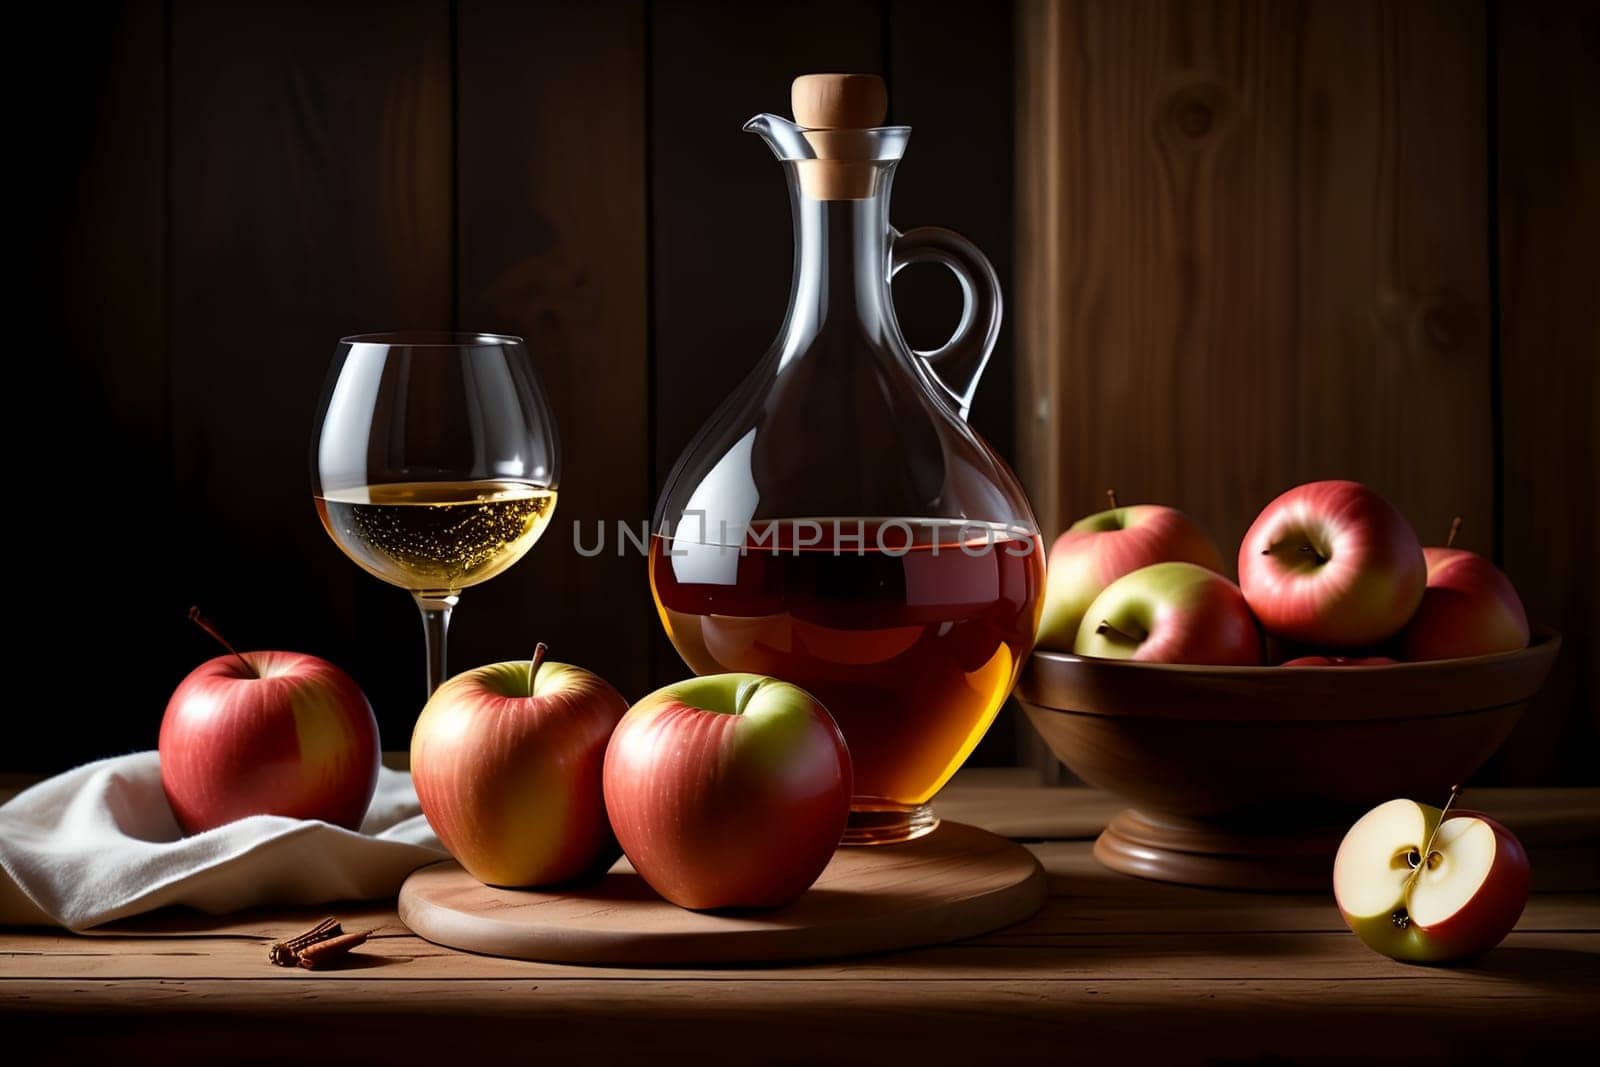 homemade apple wine in a glass and in a decanter on a background of green apples by Rawlik